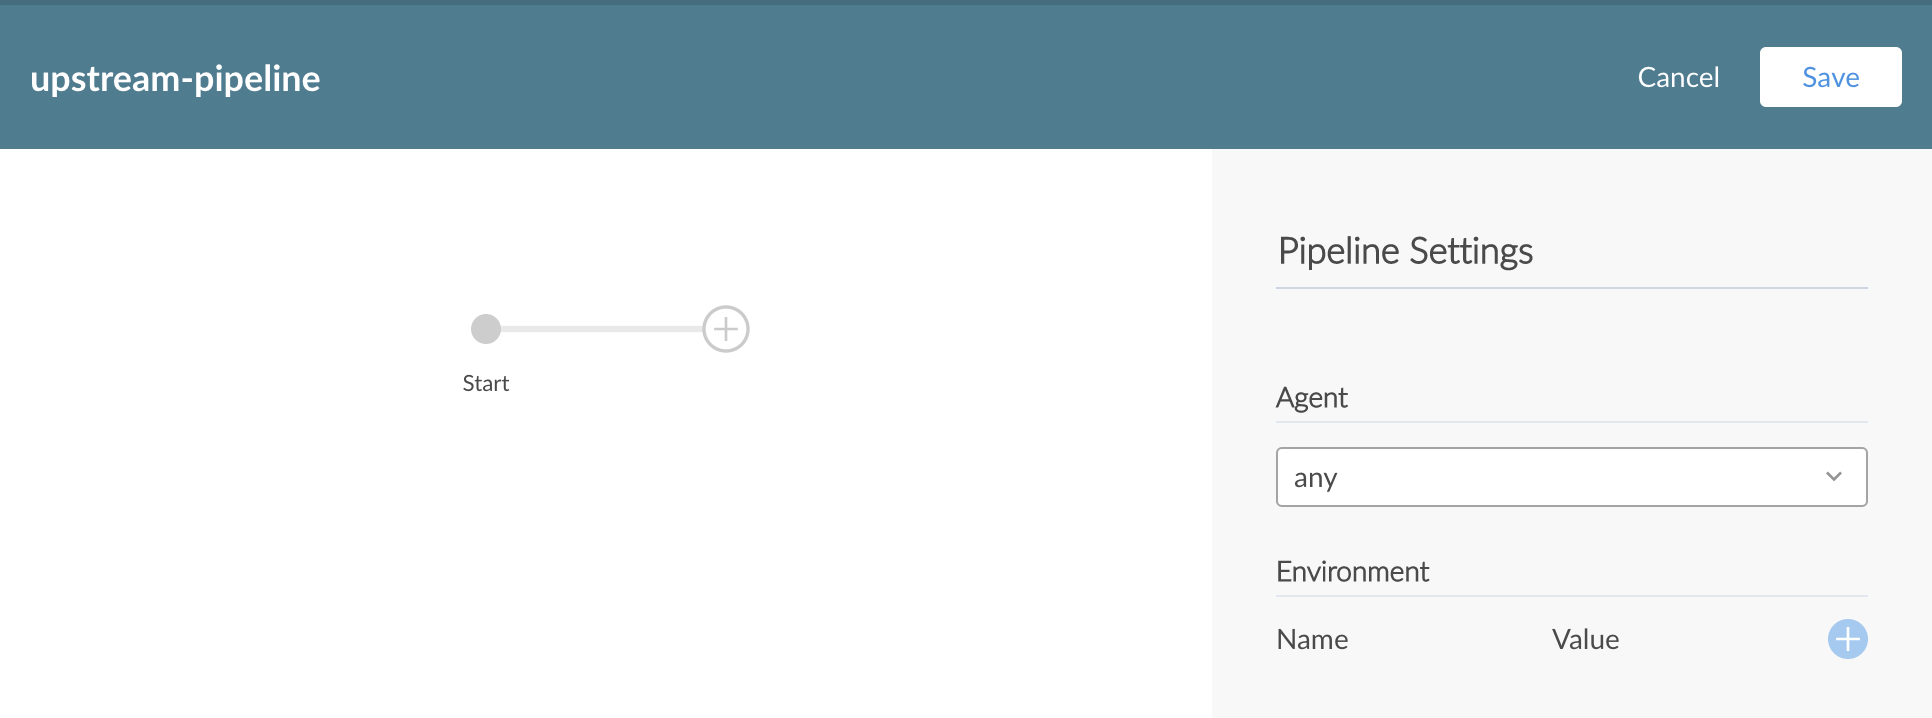 Pipeline Editor - initial page view